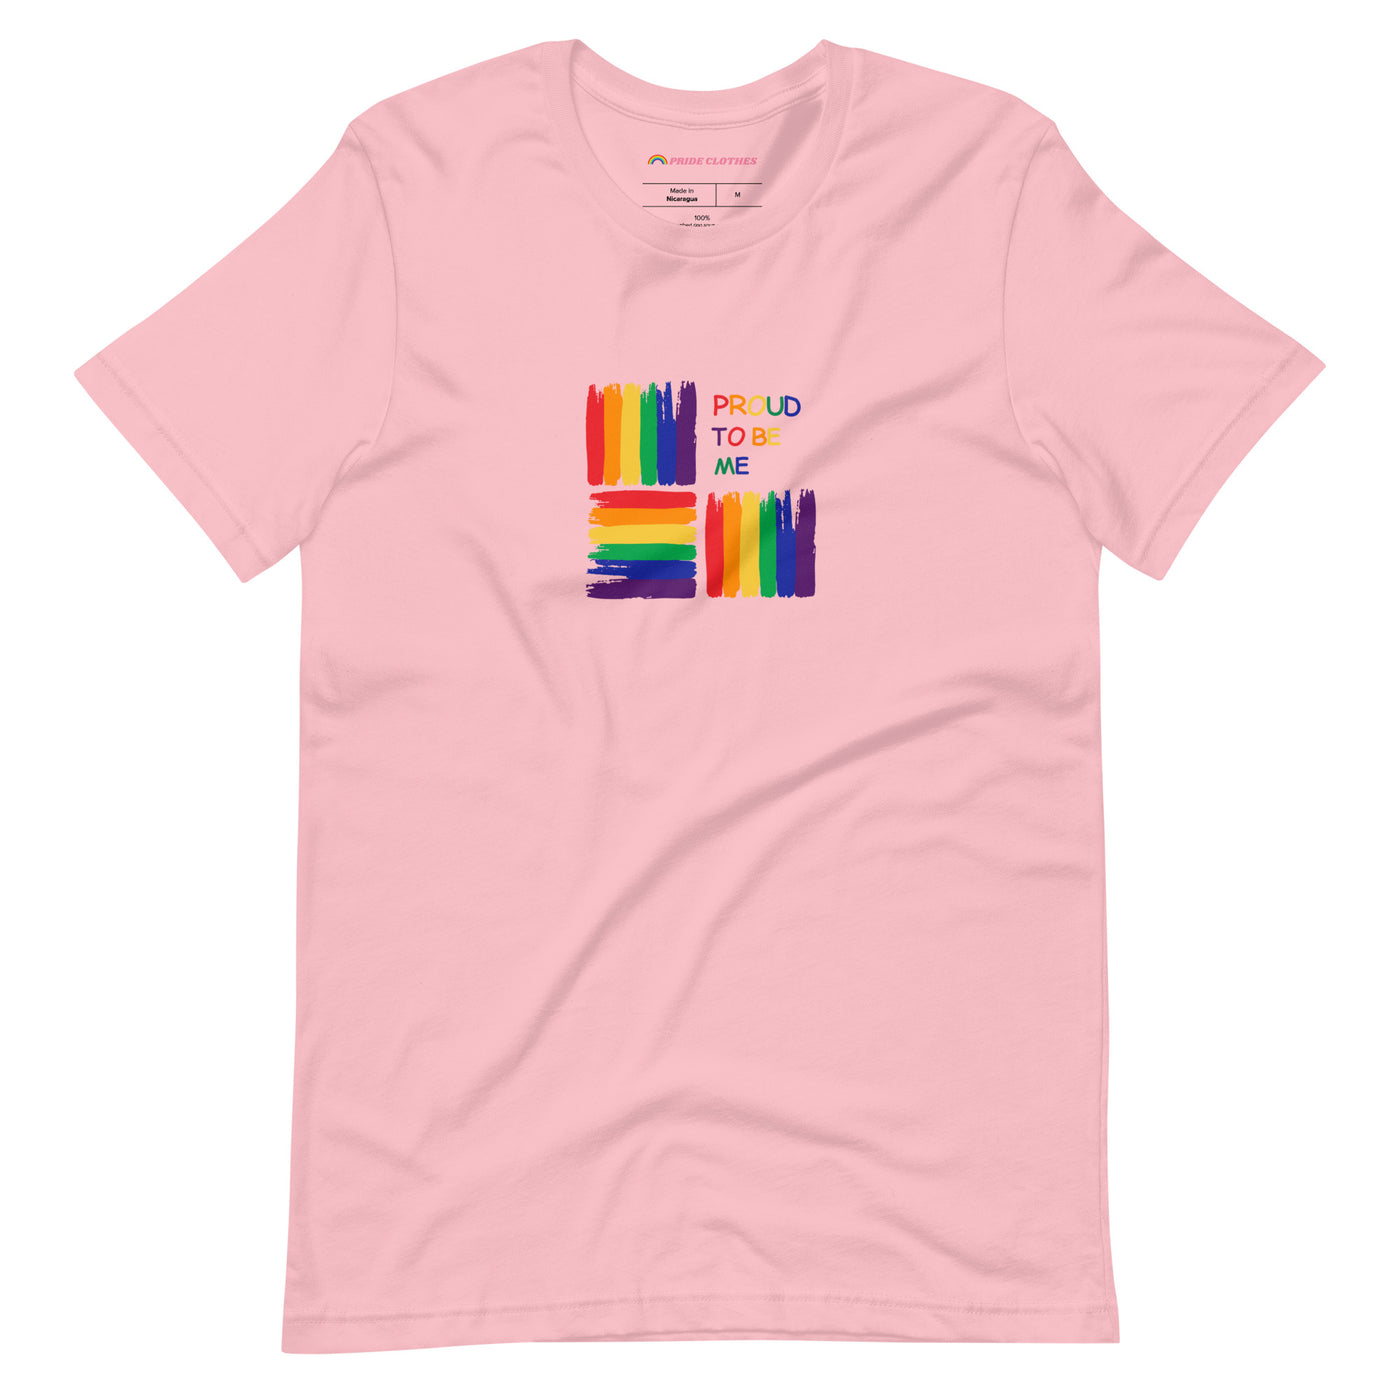 Pride Clothes - Around the Block Proud to Be Me Rainbow Pride T-Shirt - Pink